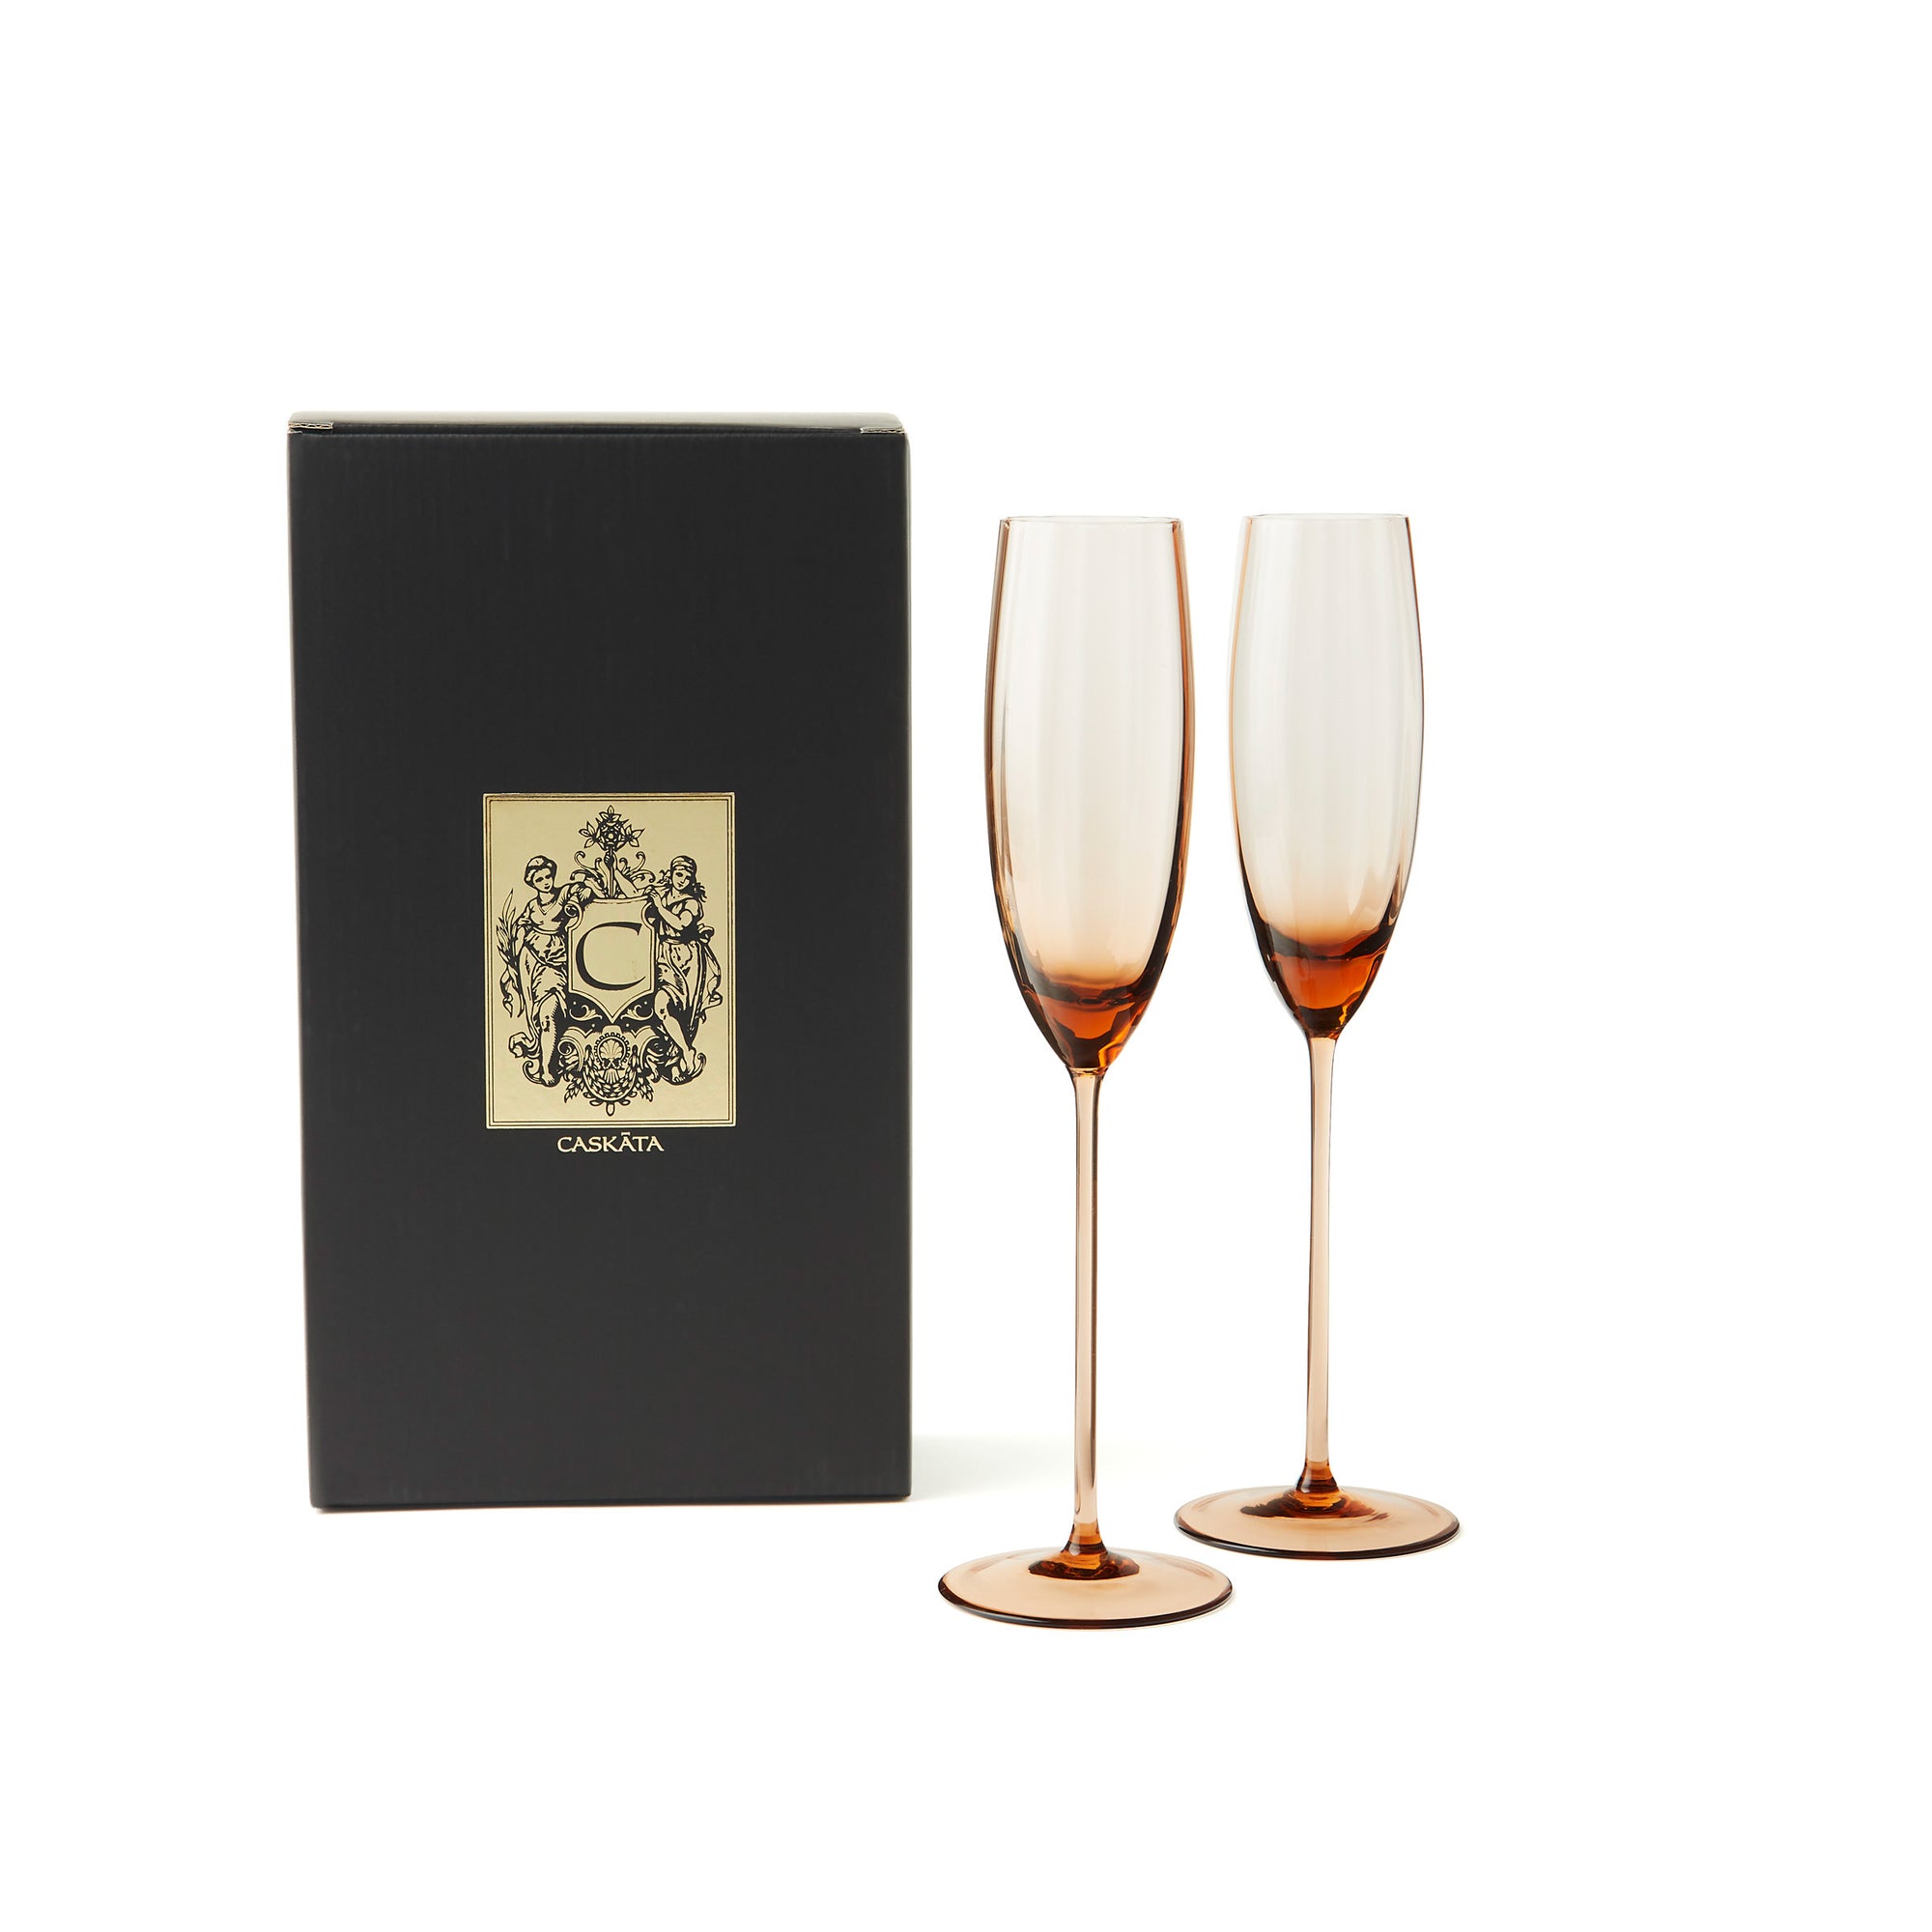 Quinn Mouth blown crystal champagne flutes in Amber Set of 2 from Caskata